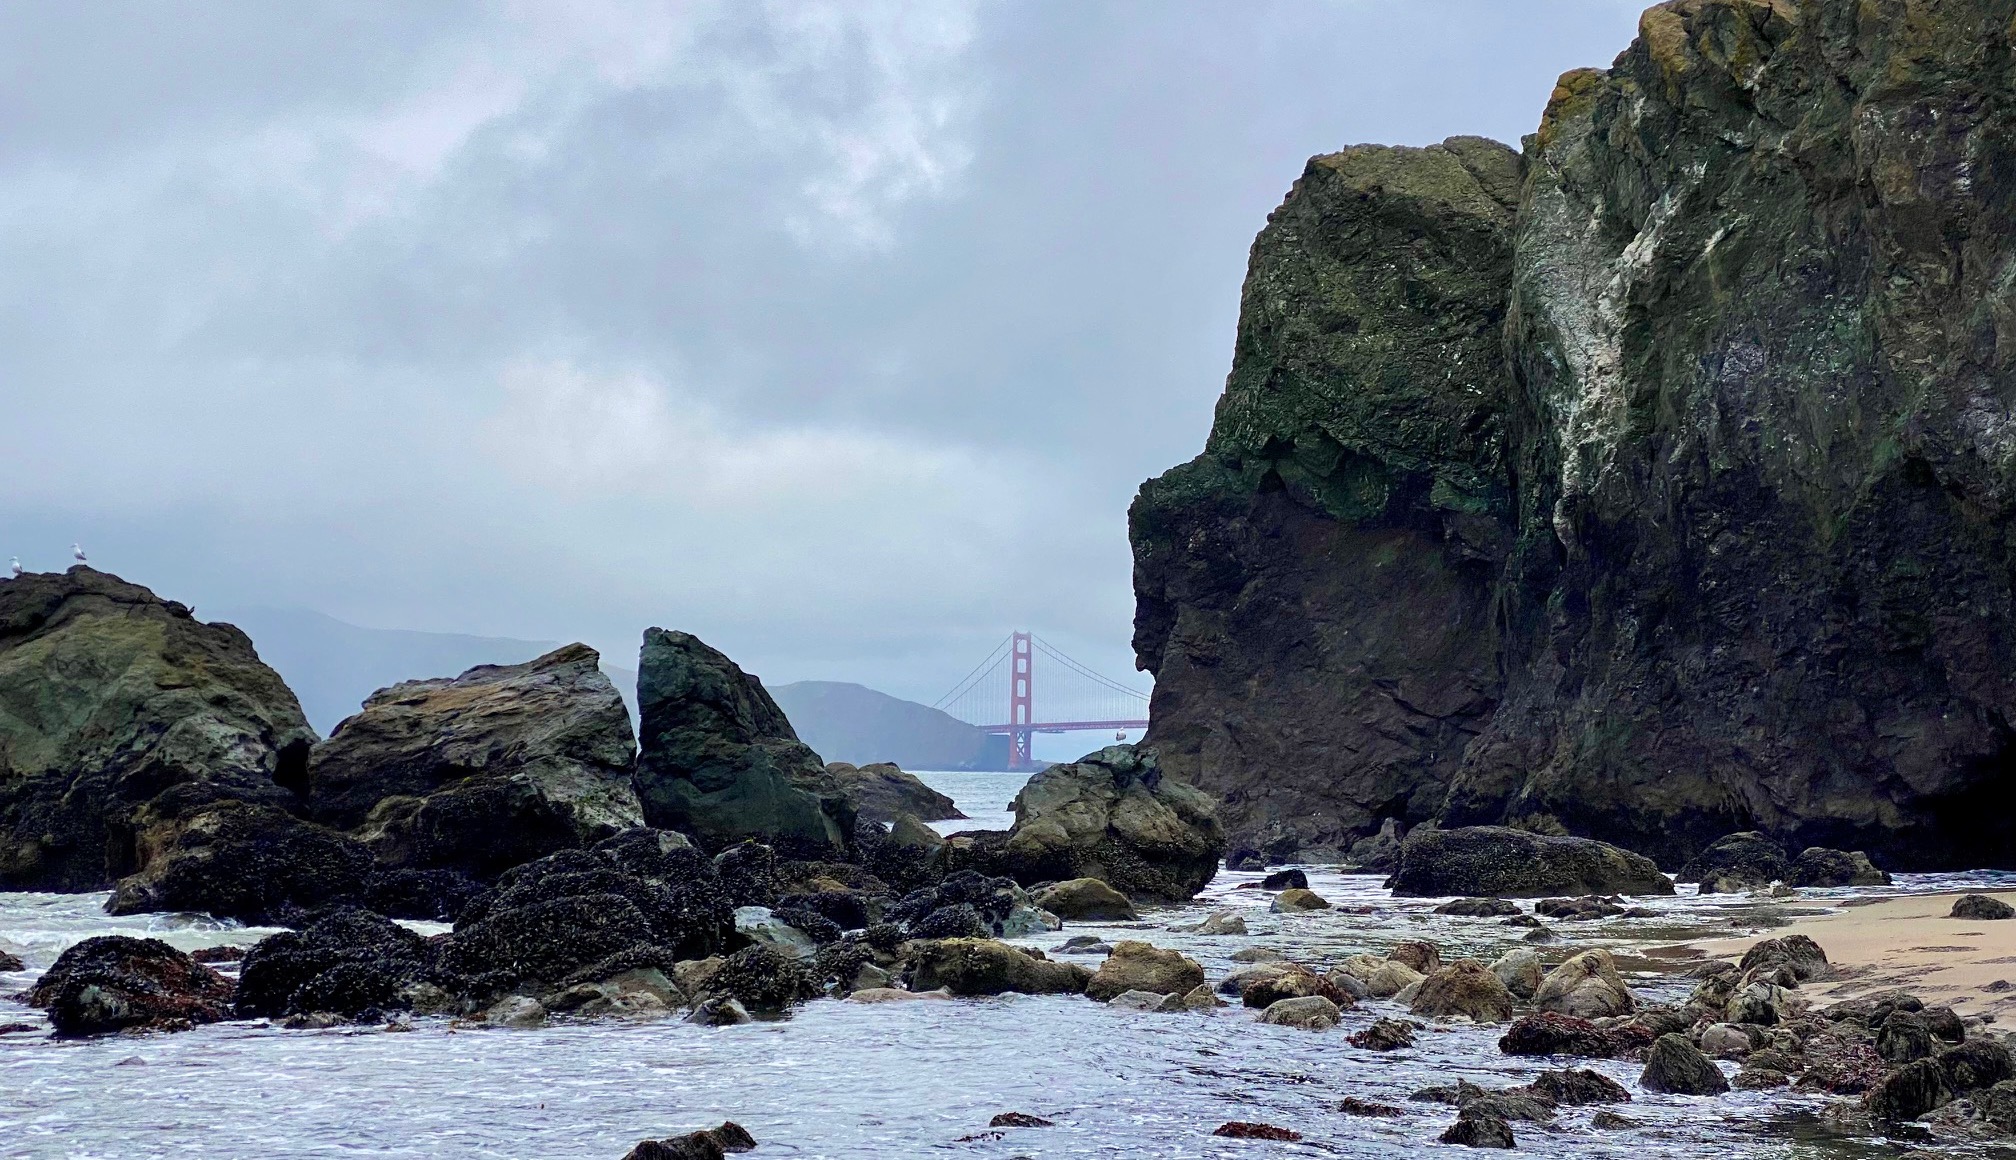 Mile Rock Beach: All to know about this secluded SF beach